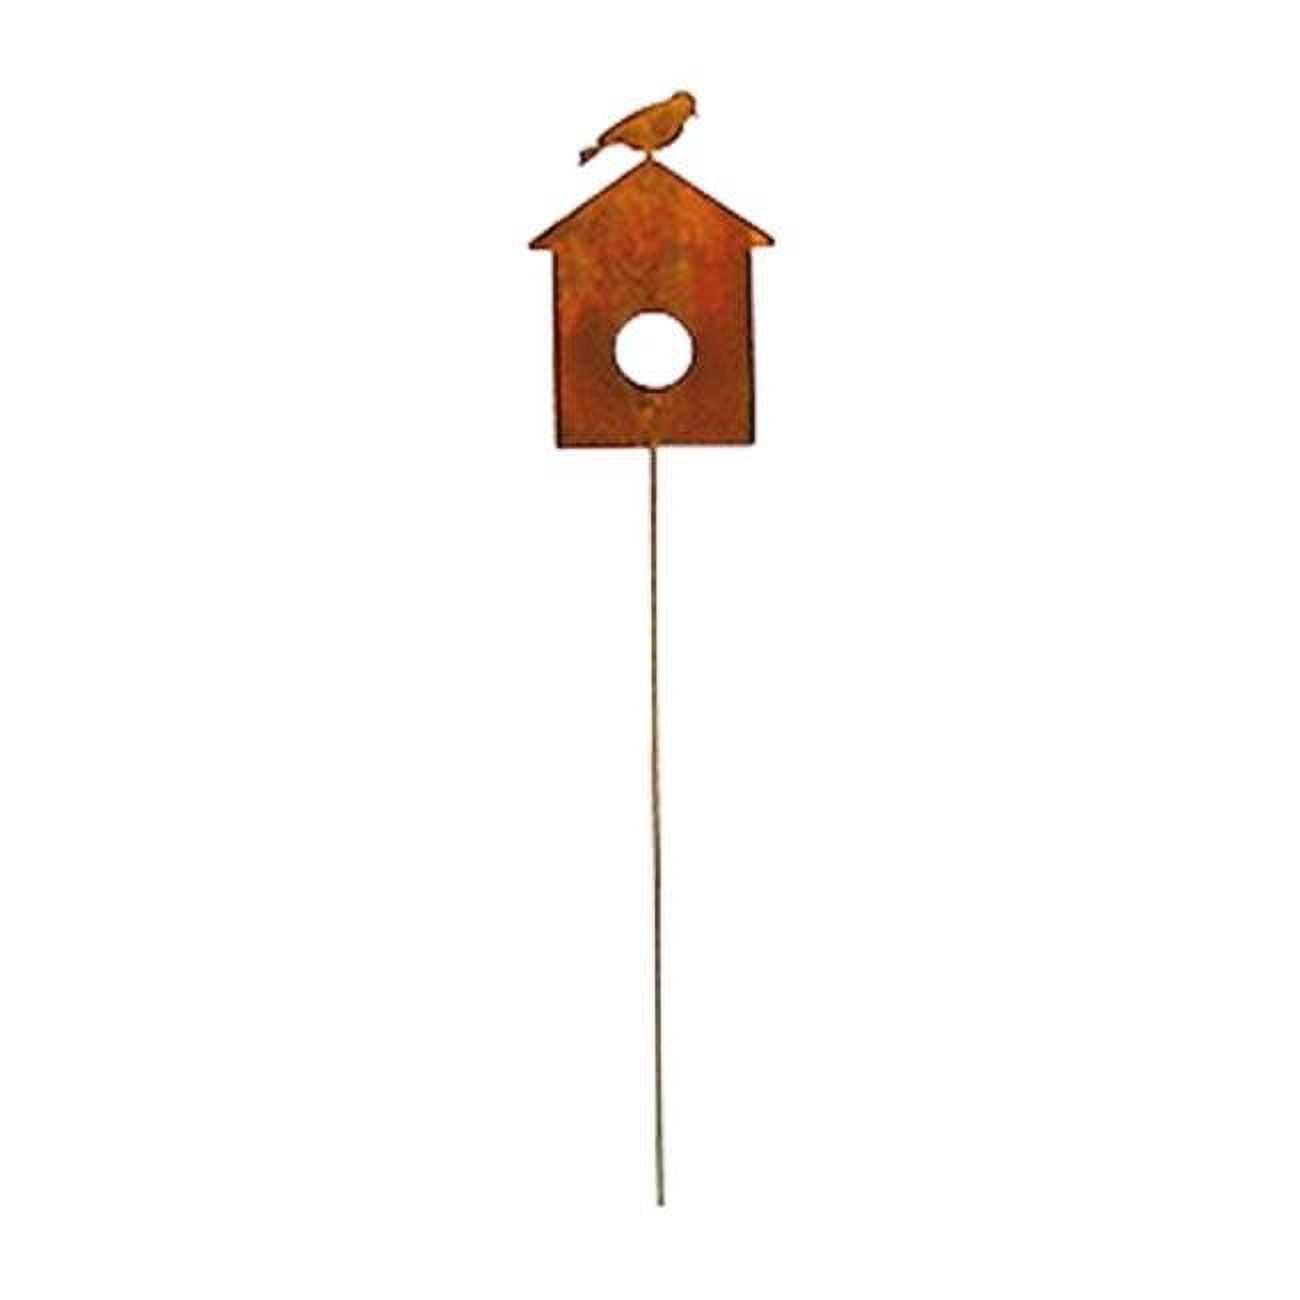 Village Wrought Iron RGS-99 Bird House Rusted Stake - image 1 of 4